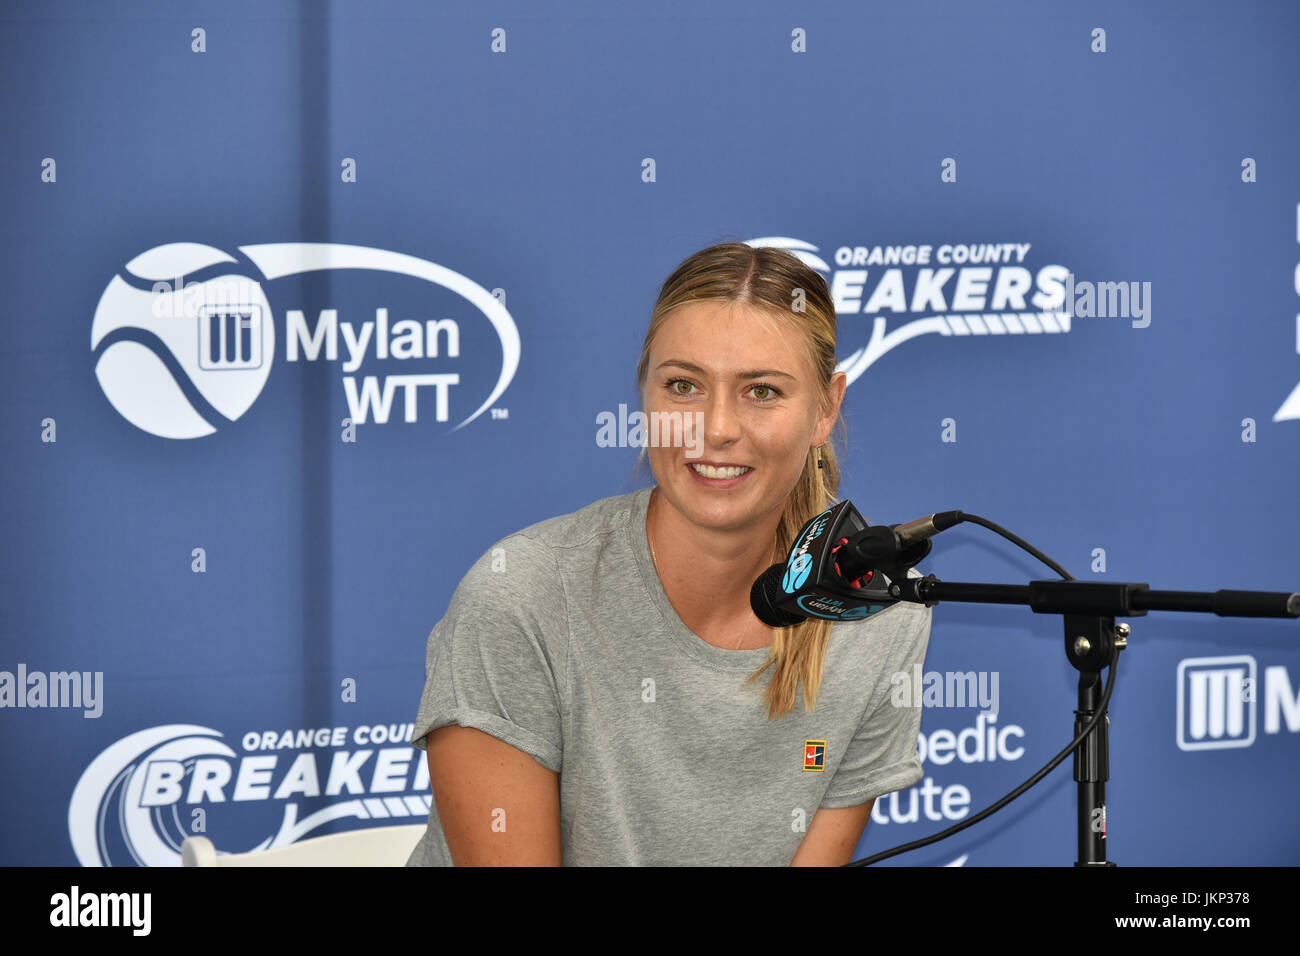 Maria Sharapova, playing World Team Tennis for the Orange County Breakers in Newport Beach California holds a press conference to discuss her current injury and comeback plans for the tour. She is playing this evening for two sets. Stock Photo